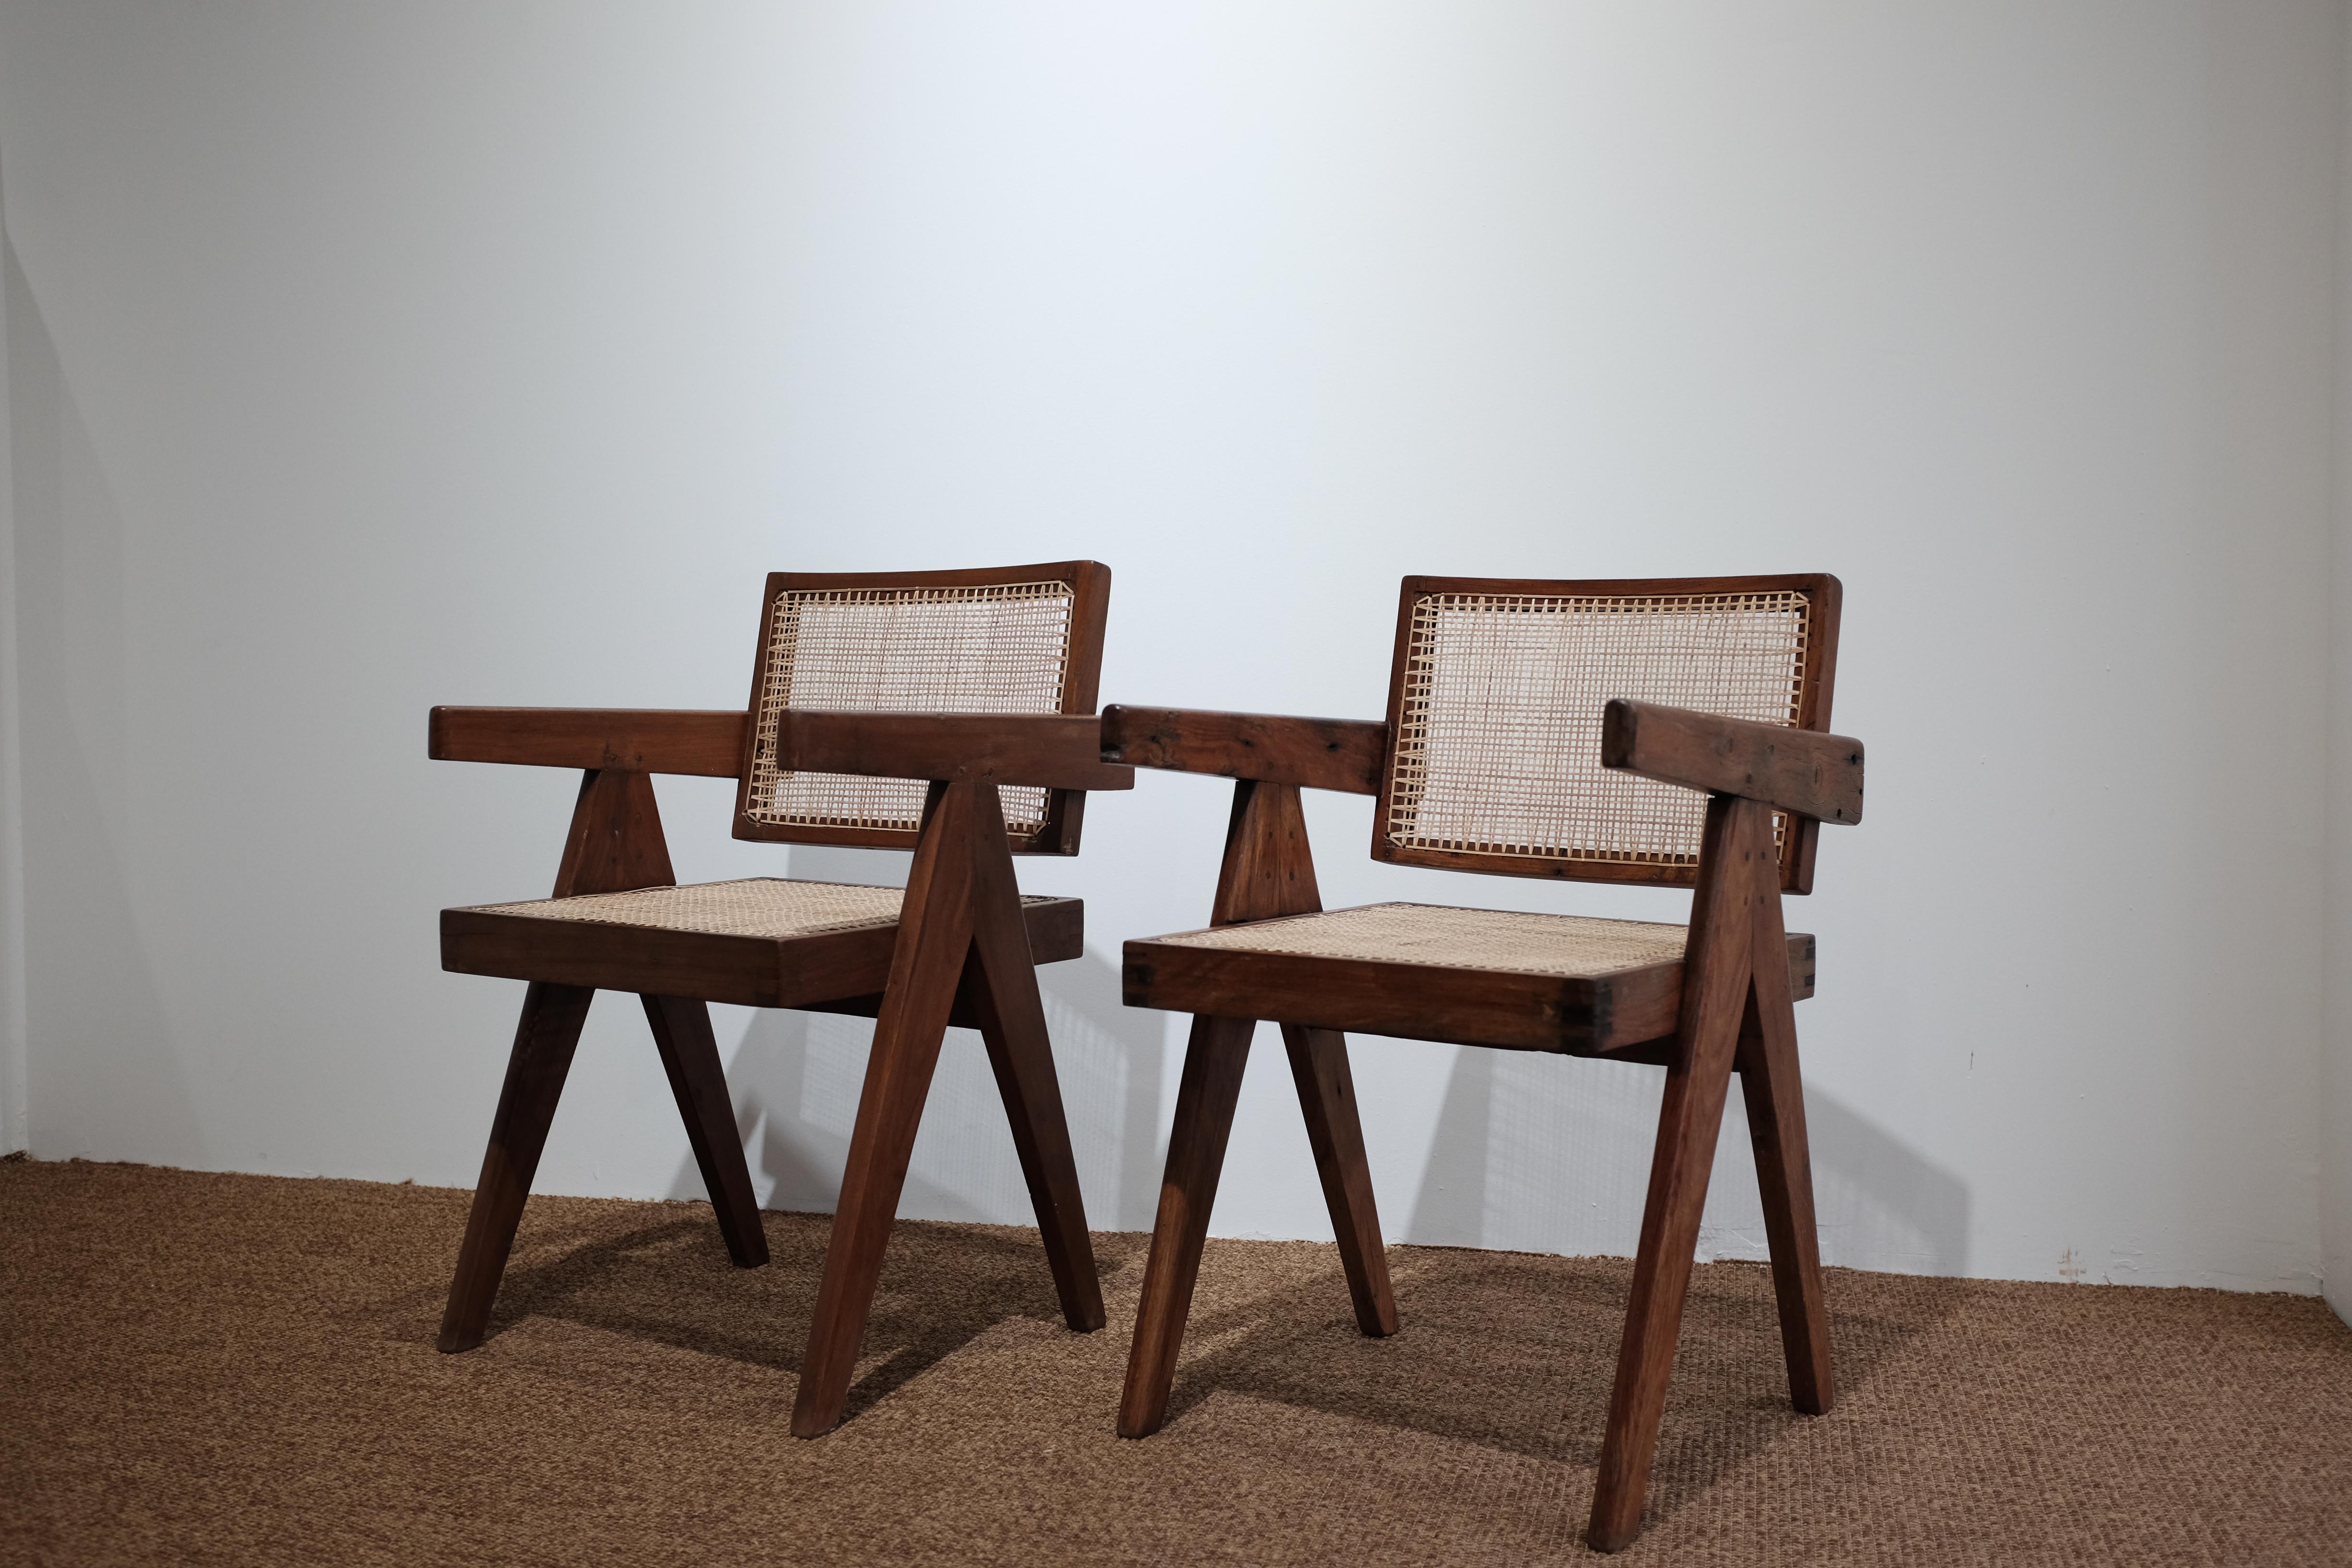 Pierre Jeanneret (1896–1967) 

Piece of Pierre Jeanneret “Office cane chair”

Chair structure with teak, seat, and back in cane.

Model designed for various administrative buildings in the city of Chandigarh, India, circa 1955.

Measures: